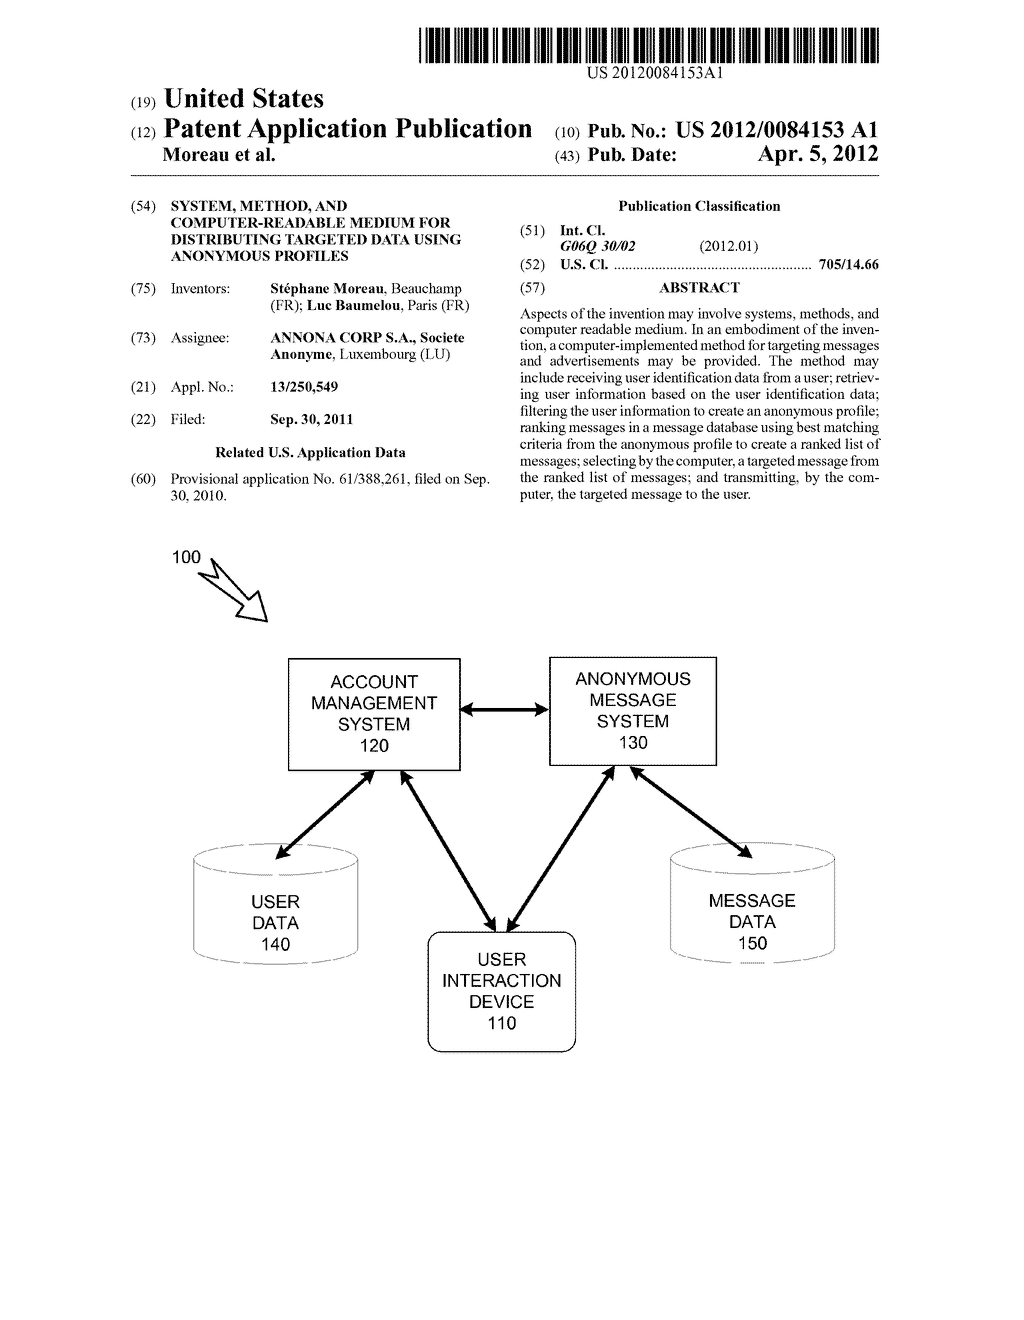 SYSTEM, METHOD, AND COMPUTER-READABLE MEDIUM FOR DISTRIBUTING TARGETED     DATA USING ANONYMOUS PROFILES - diagram, schematic, and image 01